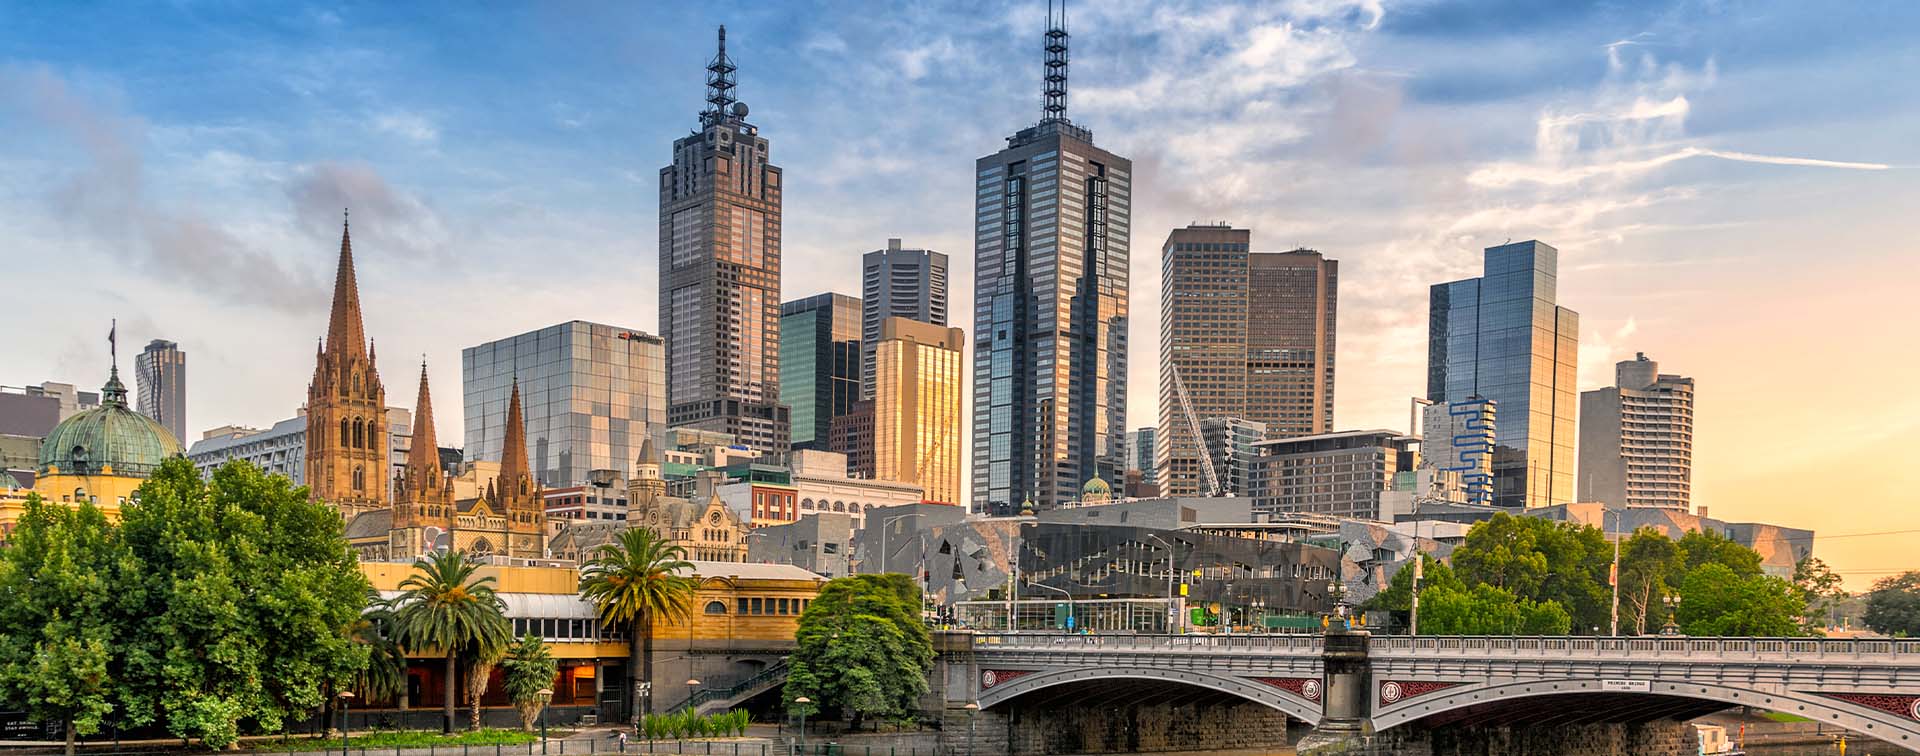 View of Melbourne’s central business district, Australia